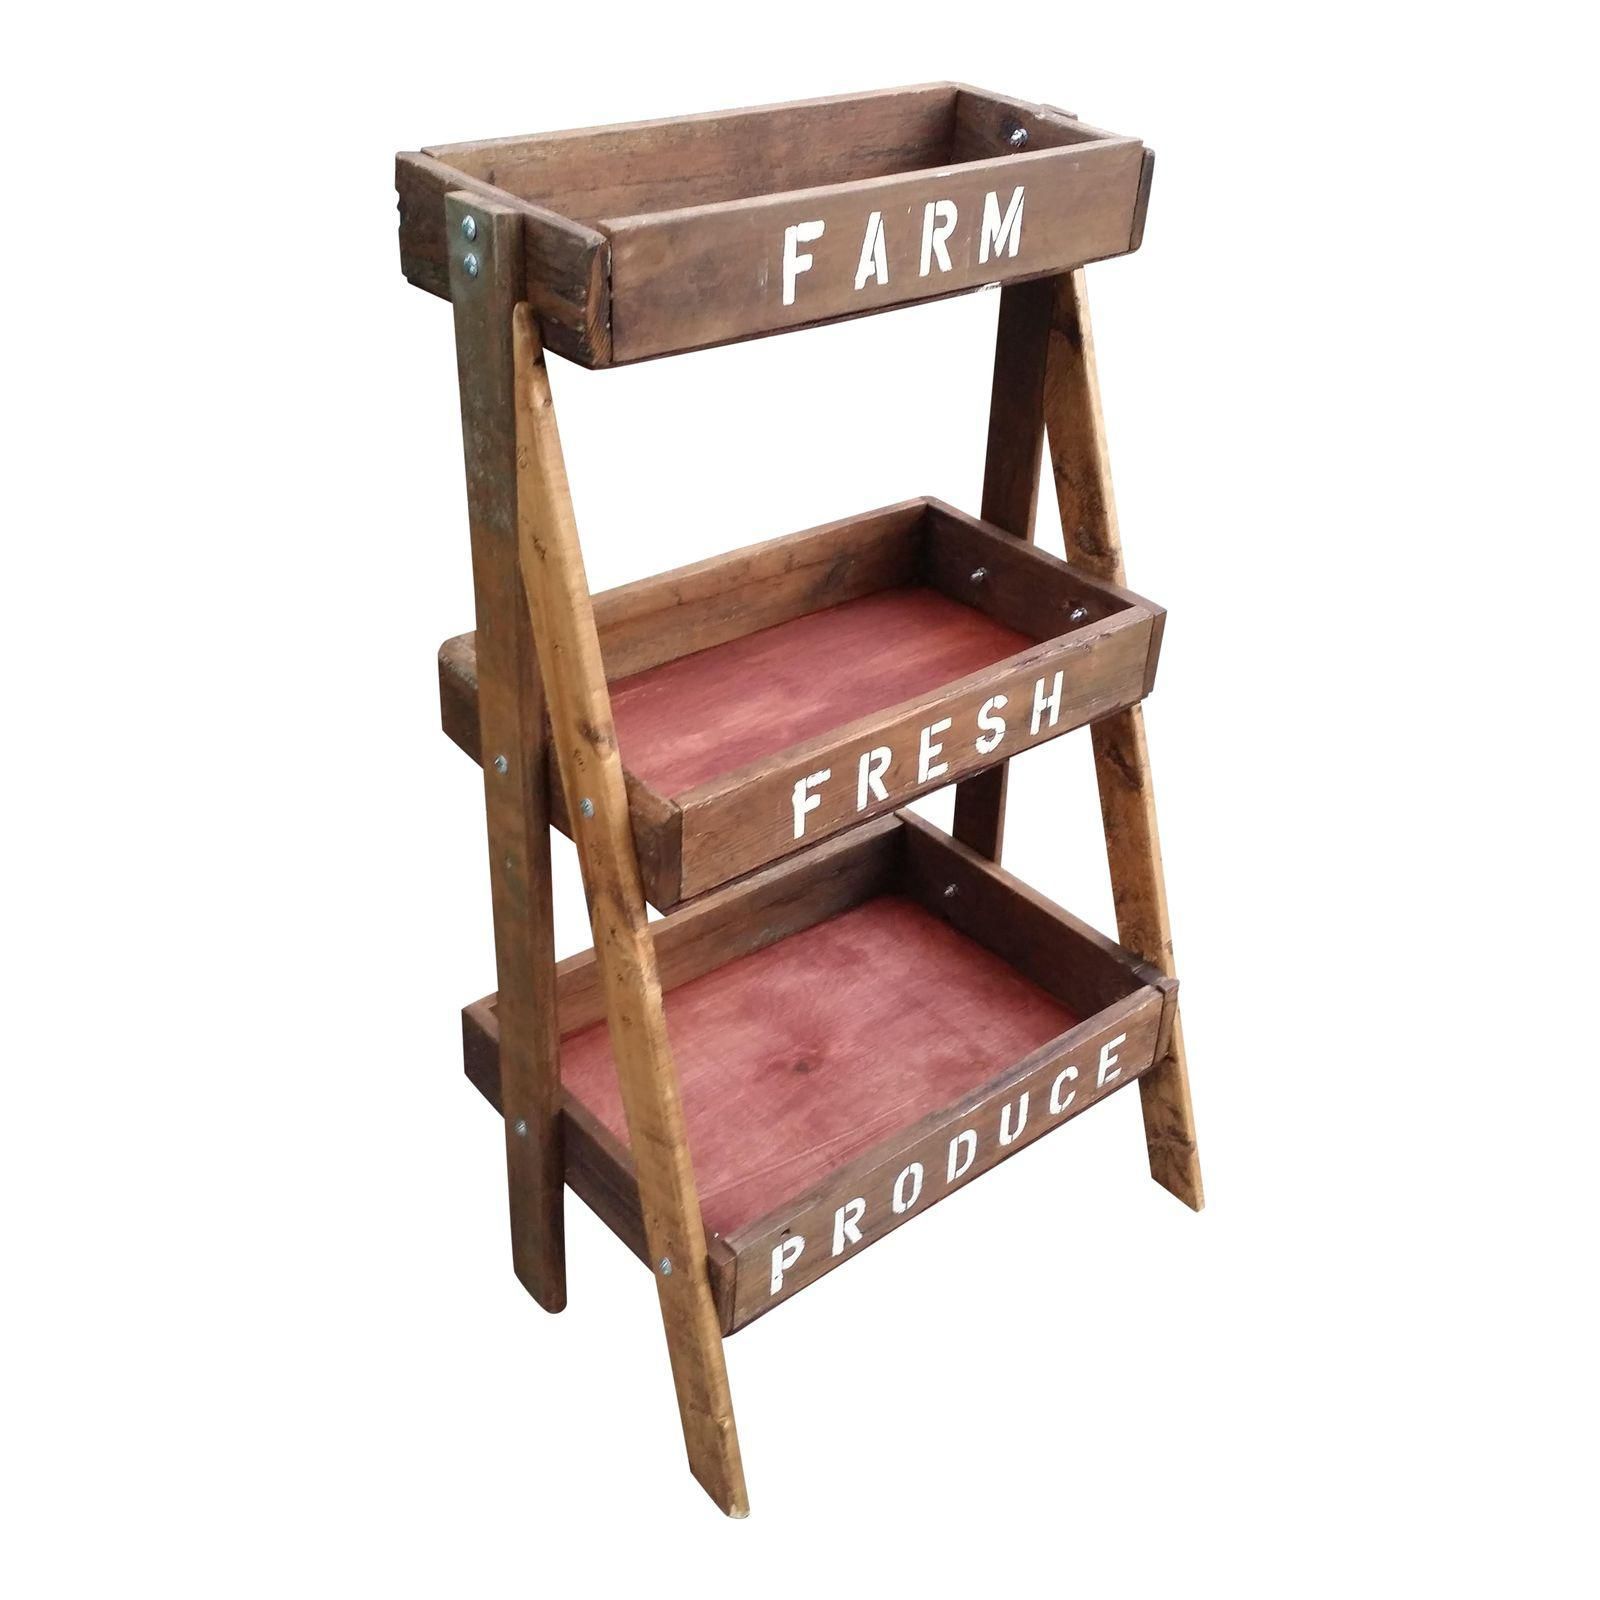 Farm Stand Shelf – 3 Tiers – Image 1 Of 5 | Farm Stand Ideas, Farm With Farmhouse Stands With Shelves (View 14 of 20)